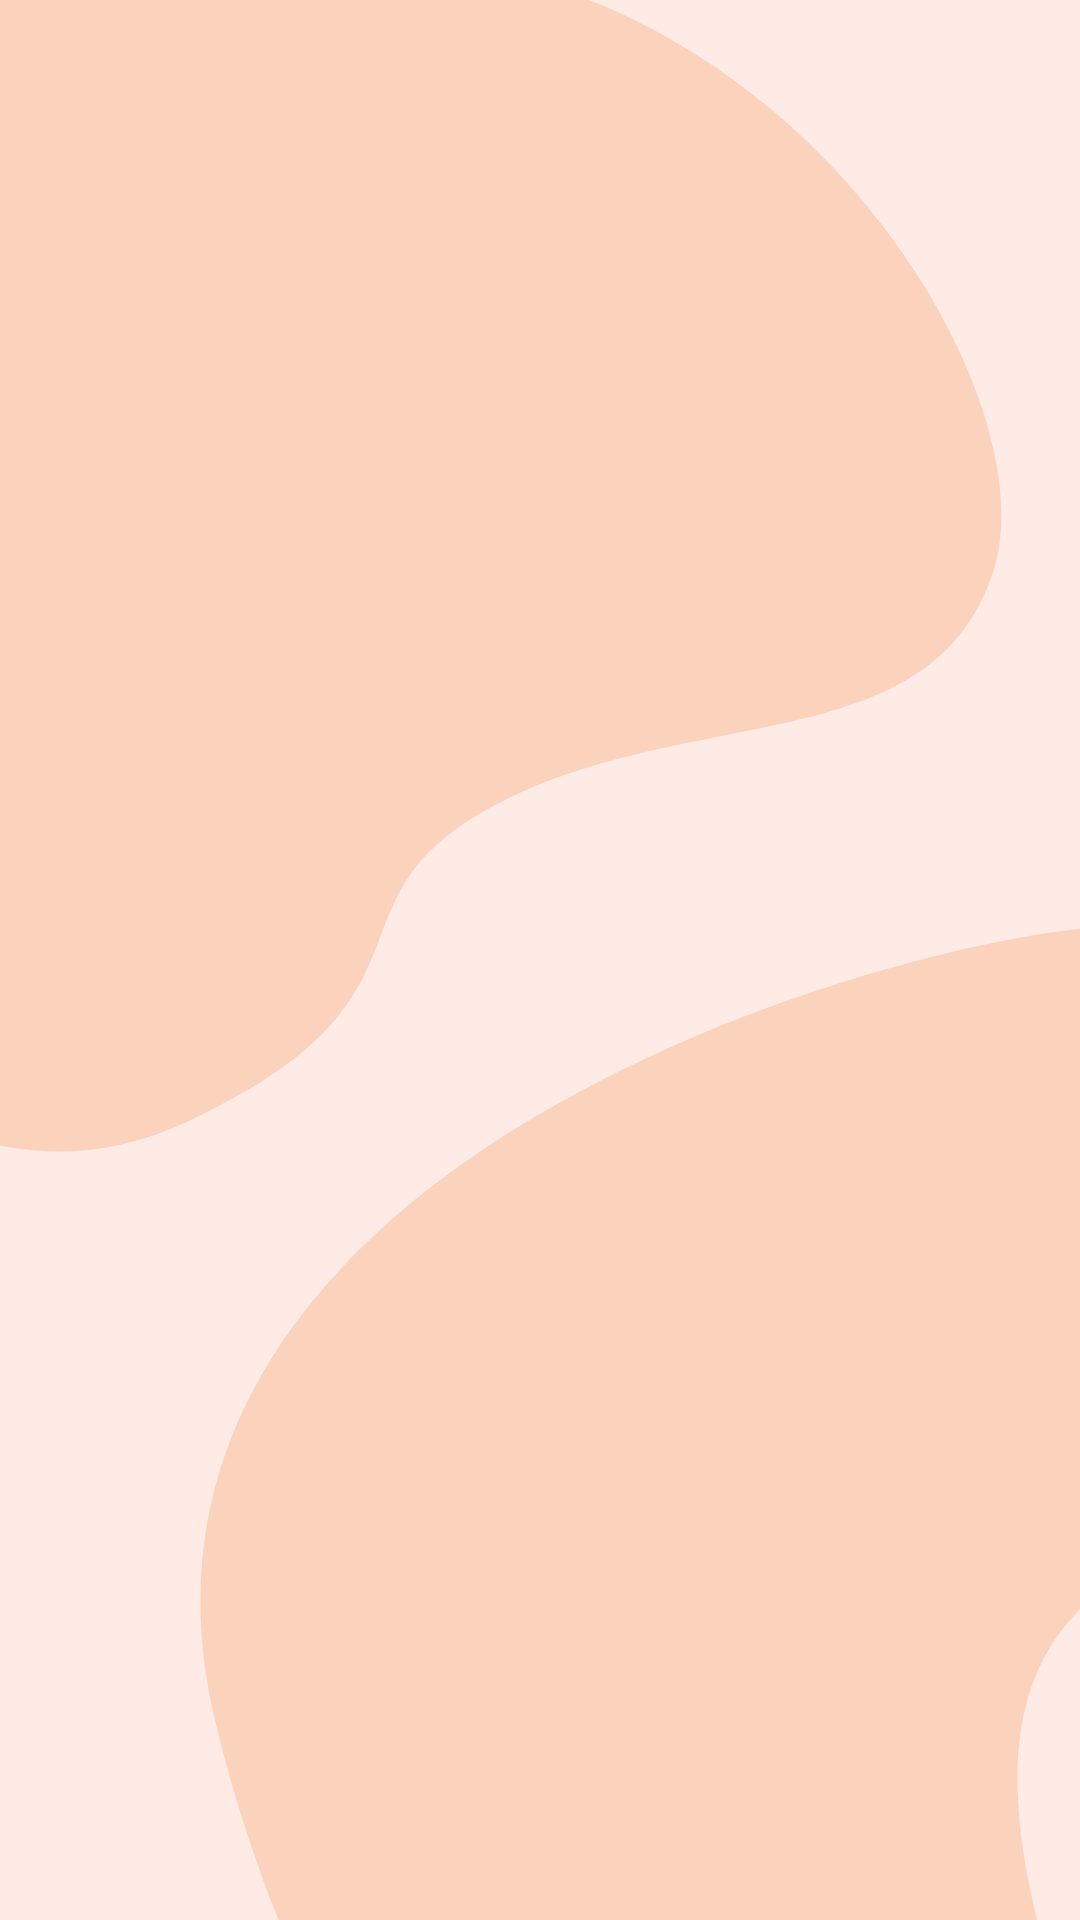 A pastel pink and peach-colored Instagram Stories highlight cover with abstract shapes - Modern